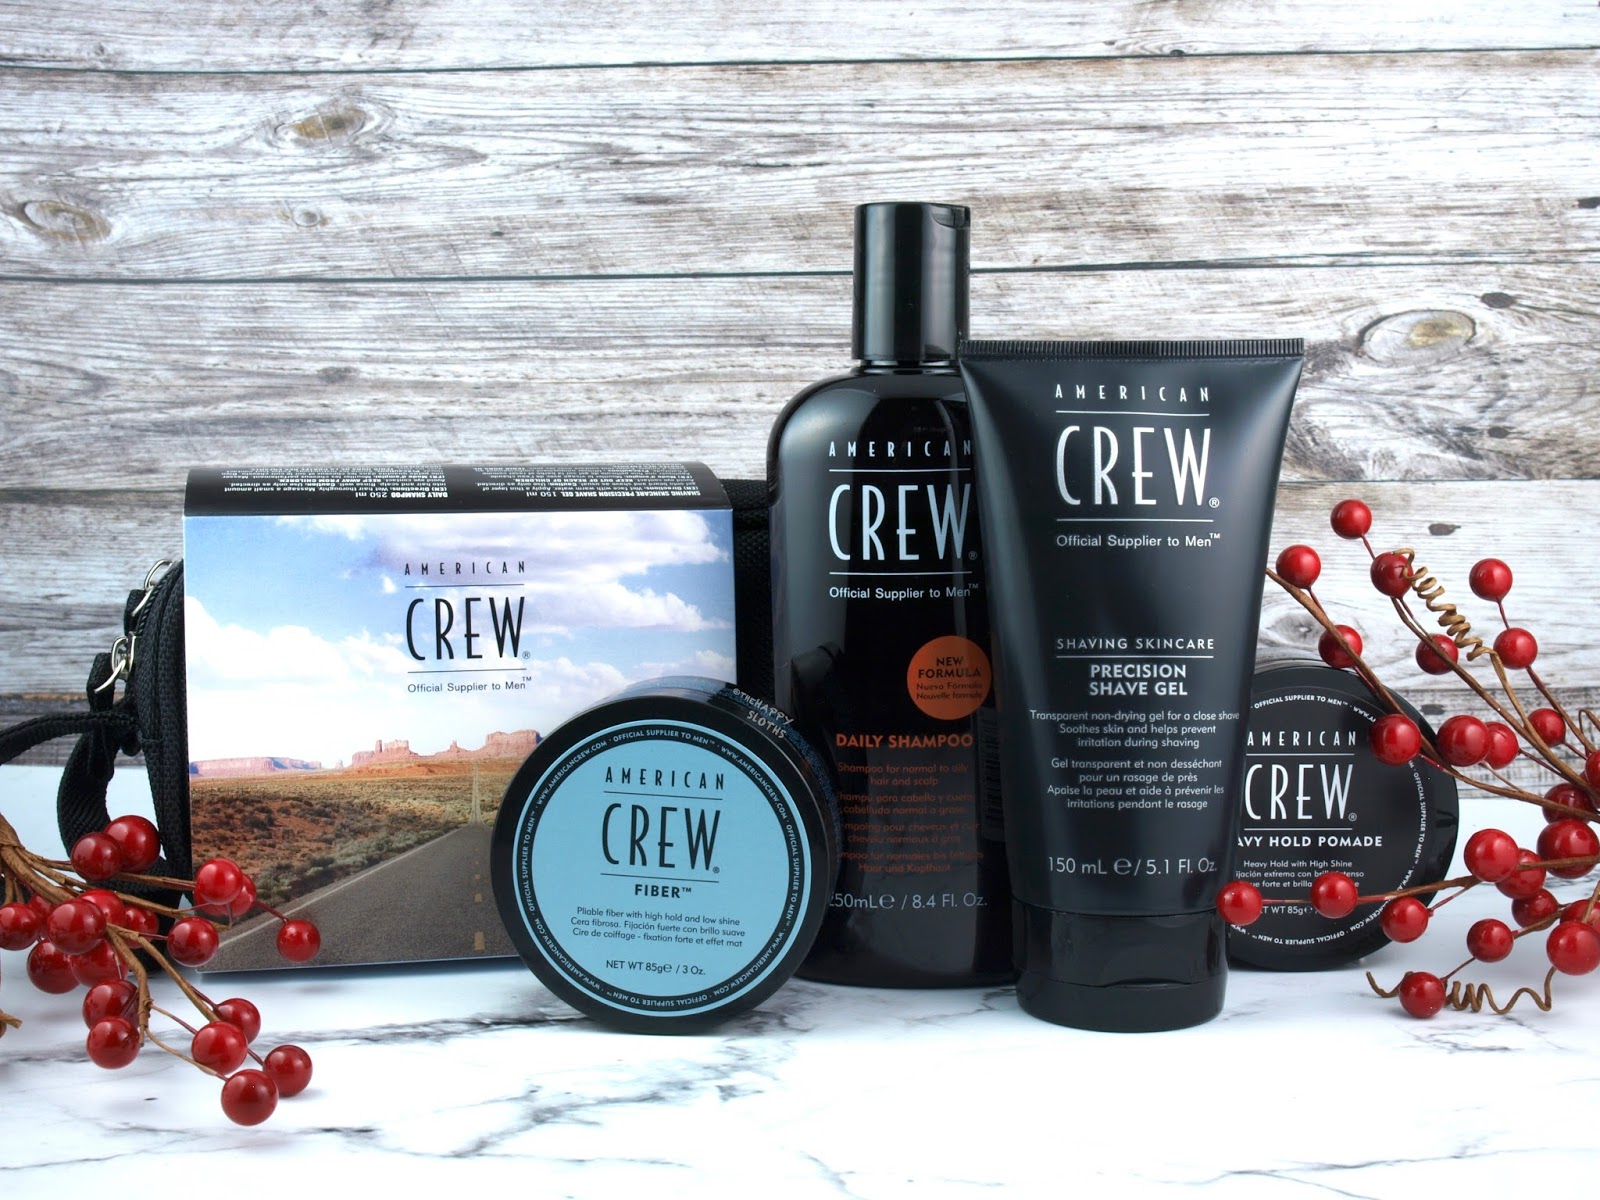 Holiday Gift for Men | American Crew Travel Pack: Review + GIVEAWAY